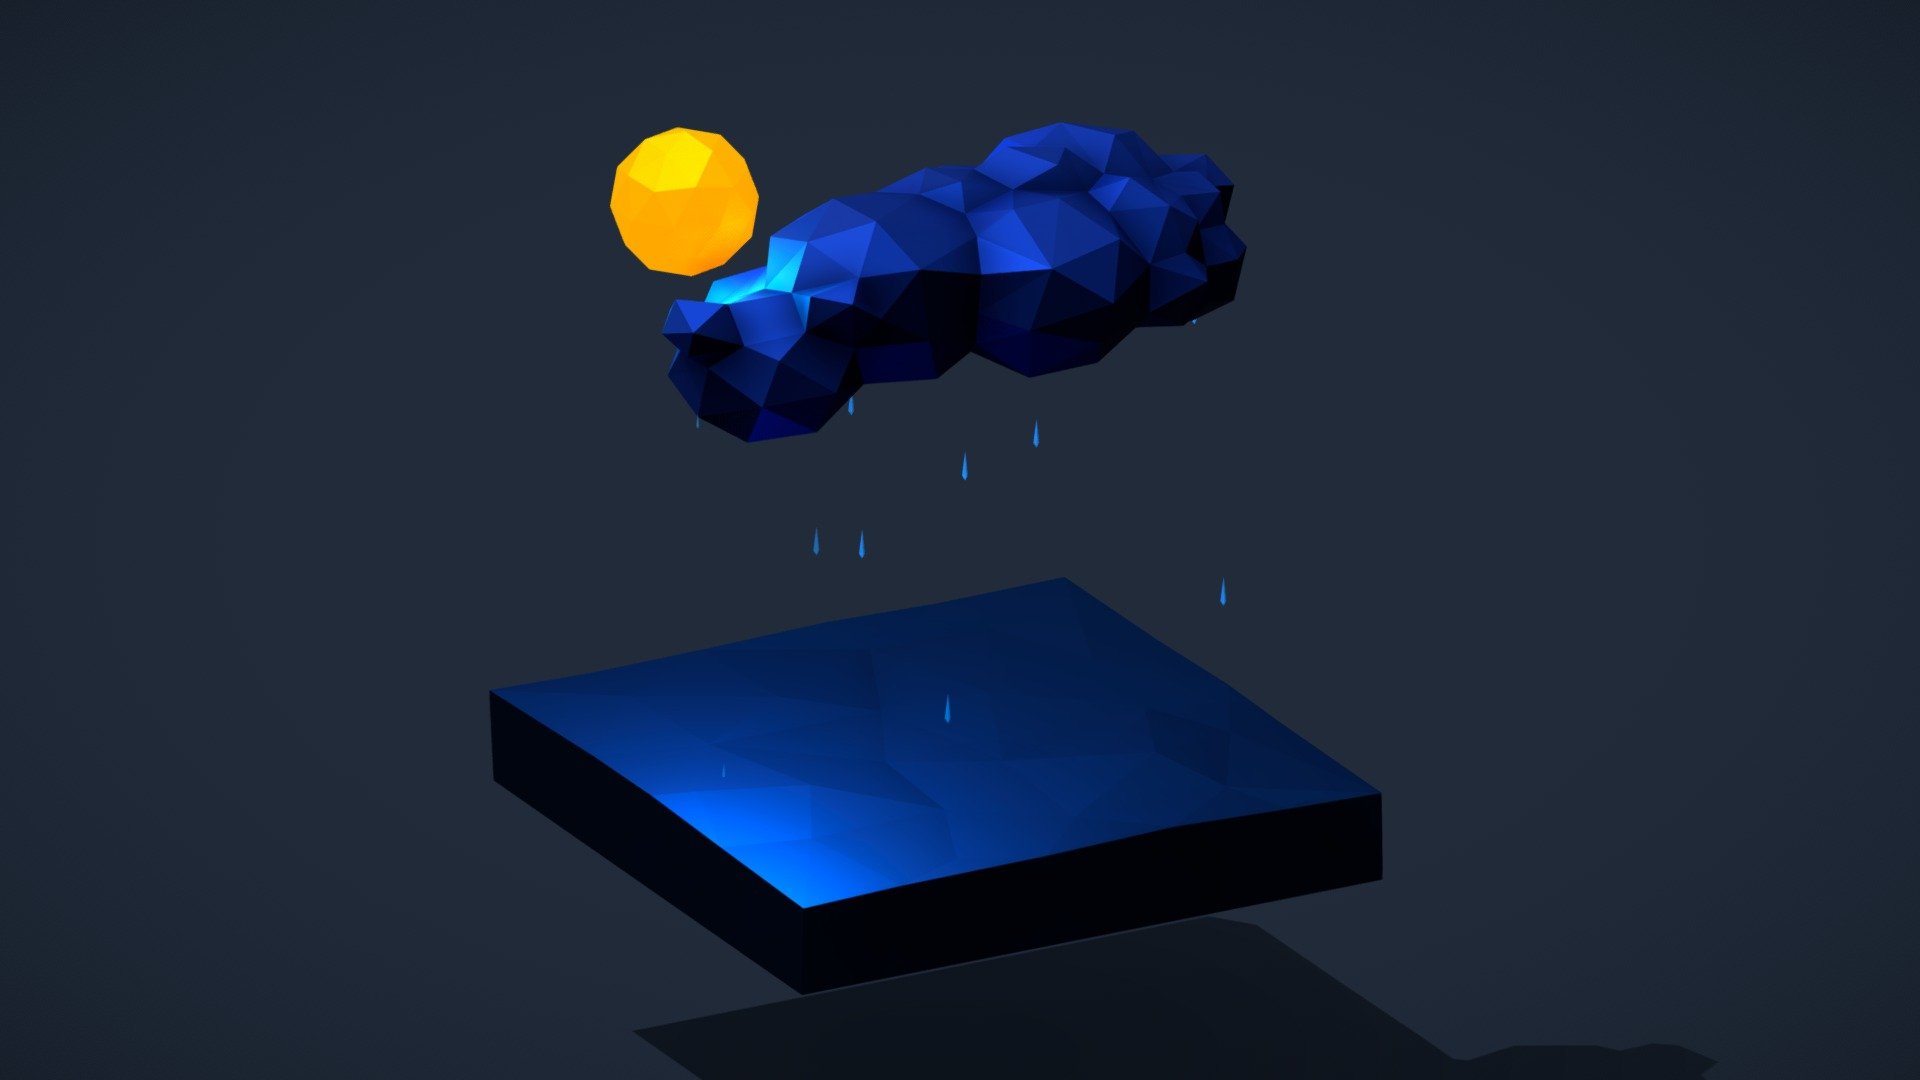 Model :

A Low-poly Boat, Rigged and animated with proper folds.

Environment :

Clouds, Rain drops, Sun, Water, Lightning. All are in a loopable animation 3d model